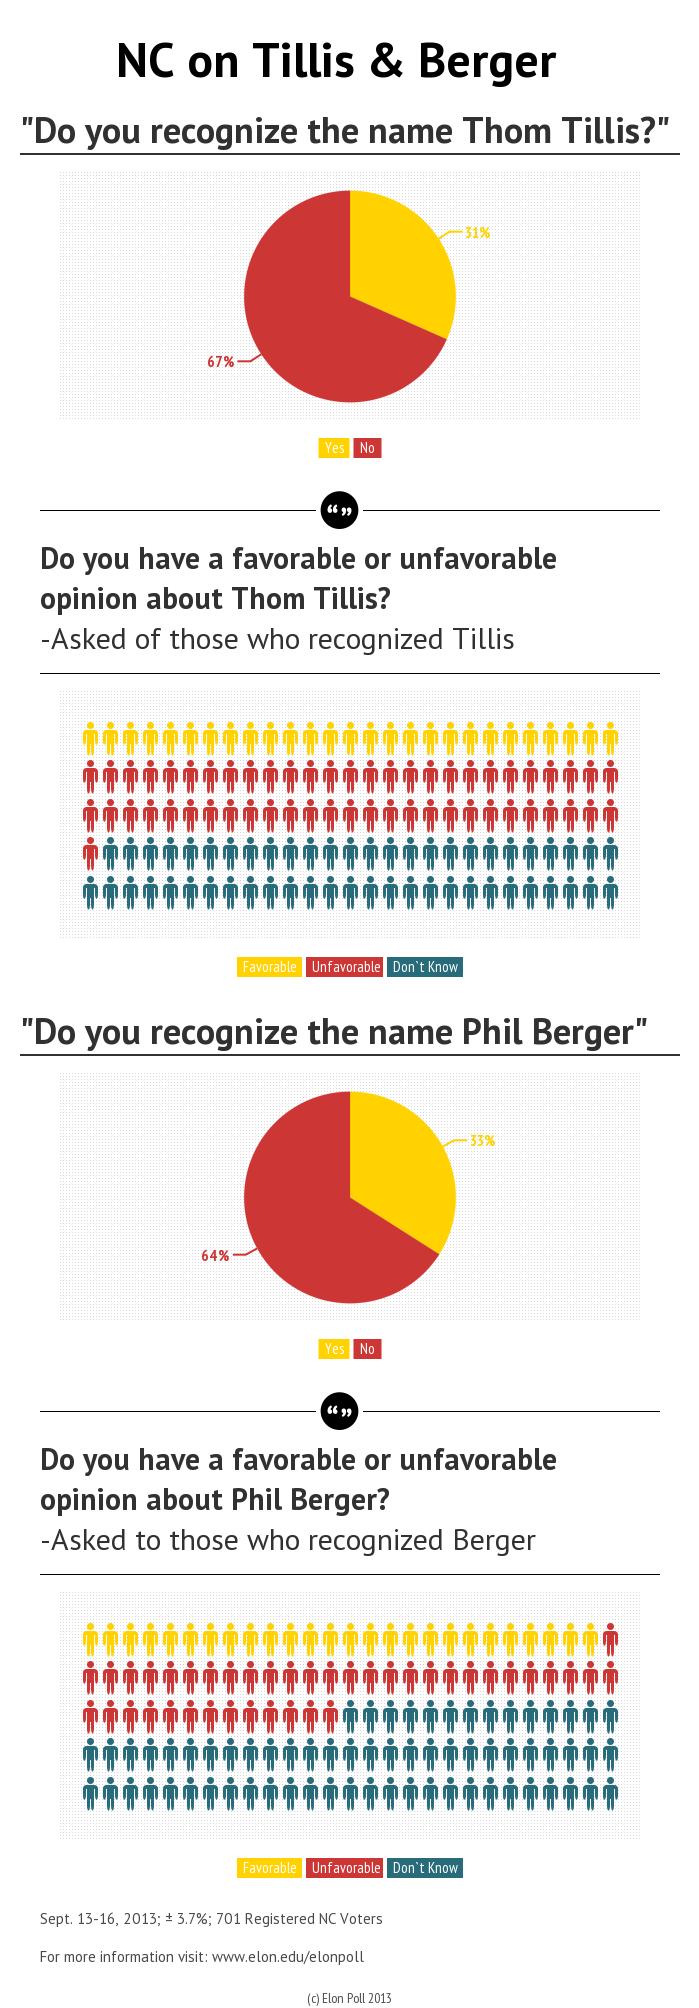 The results show that both Thom Tillis and Phil Berger are not well known among registered voters.